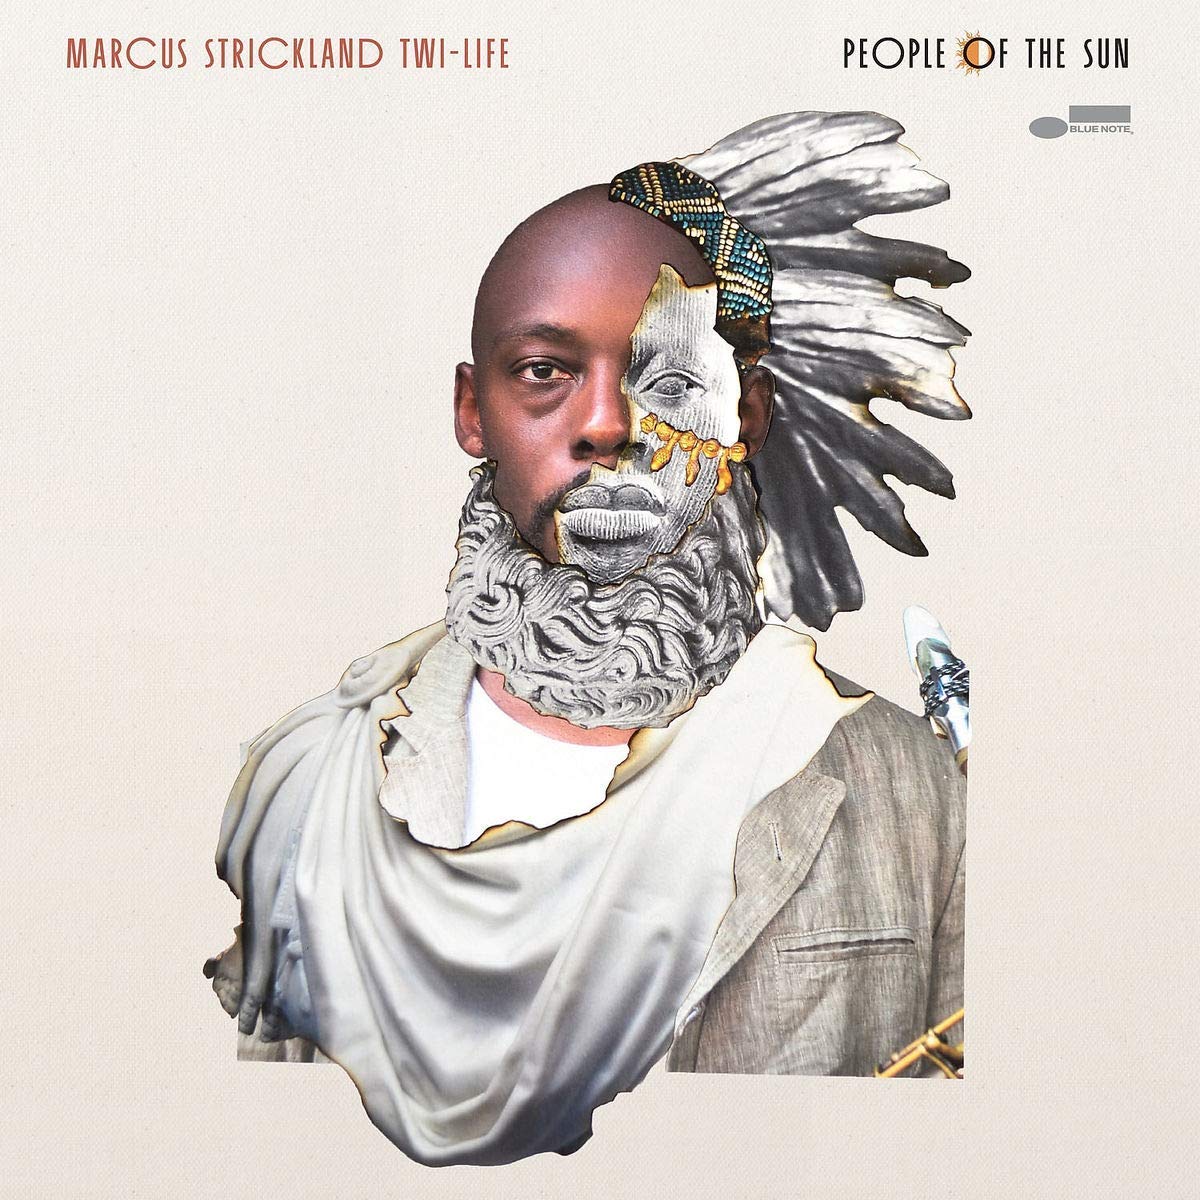 MARCUS STRICKLAND - Marcus Strickland Twi-Life : People Of The Sun cover 